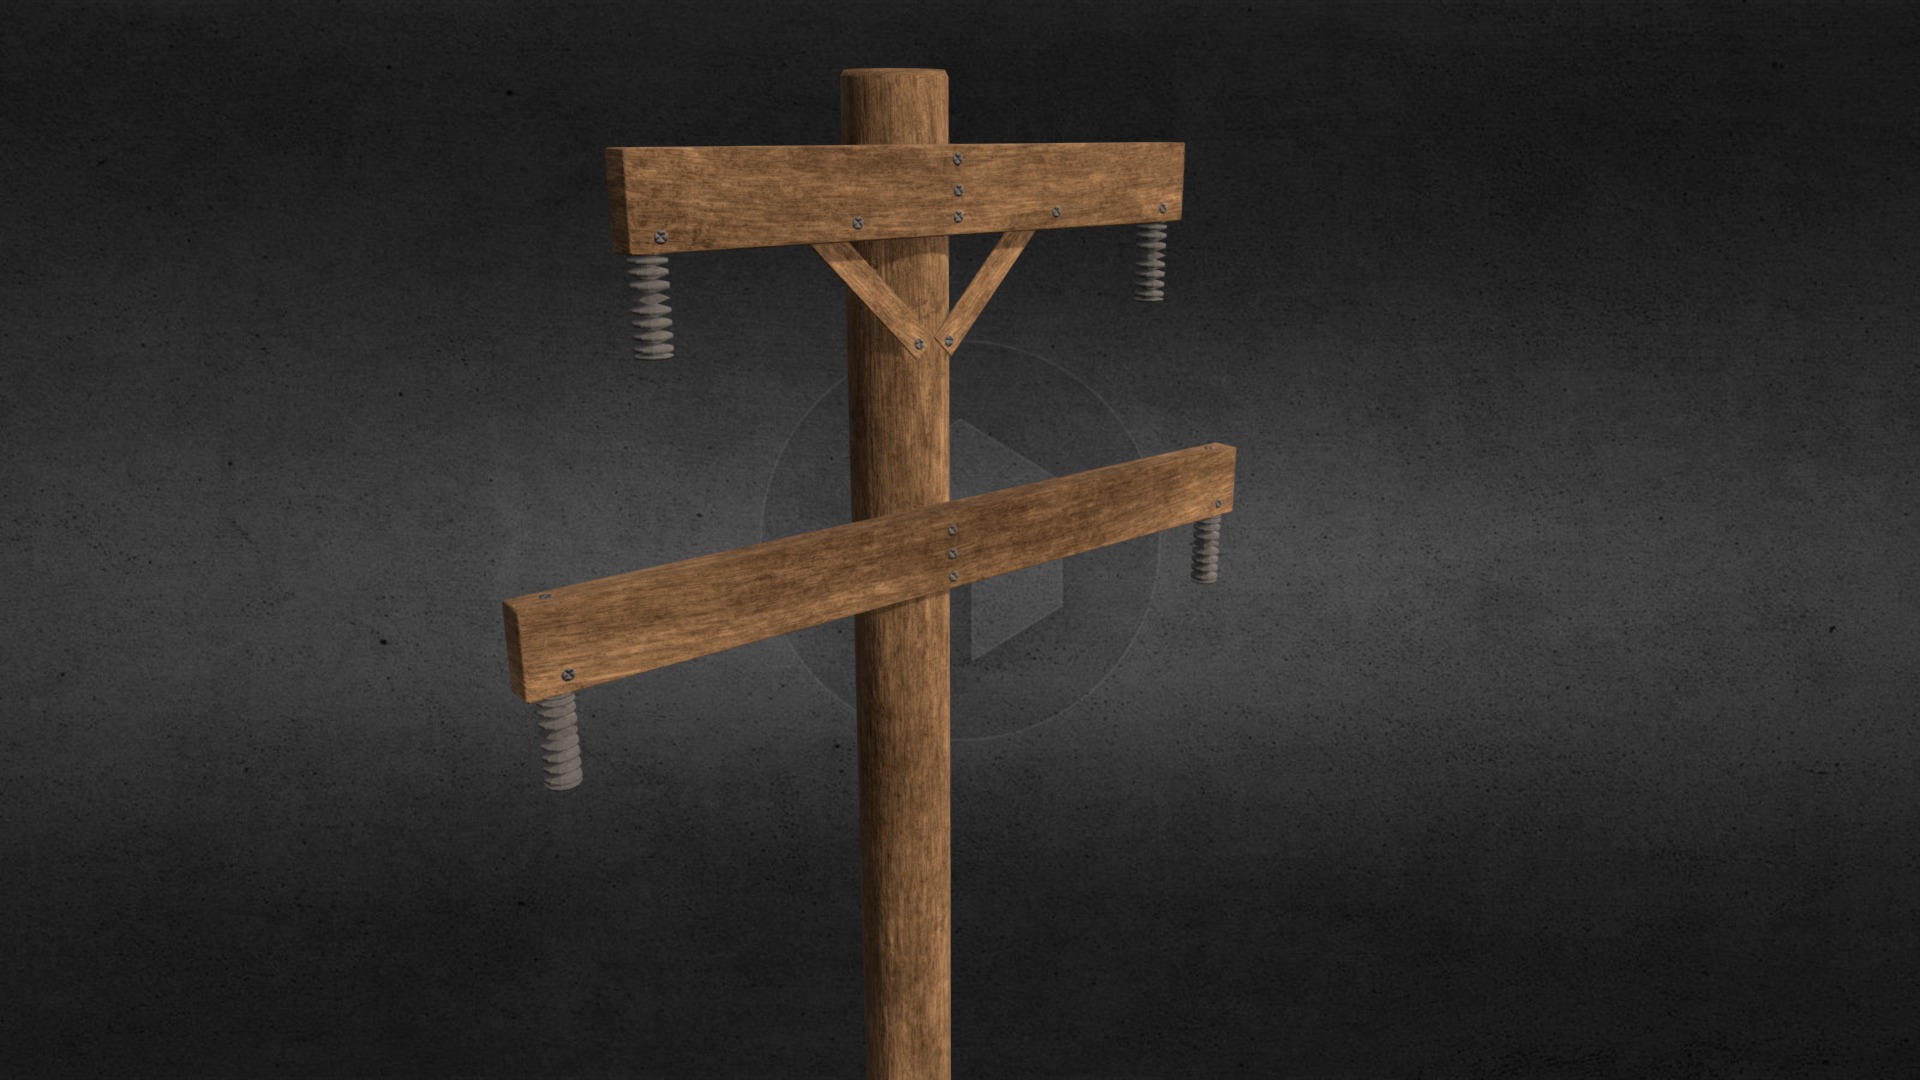 3D model Electricity Pole - This is a 3D model of the Electricity Pole. The 3D model is about a wooden cross on a black surface.